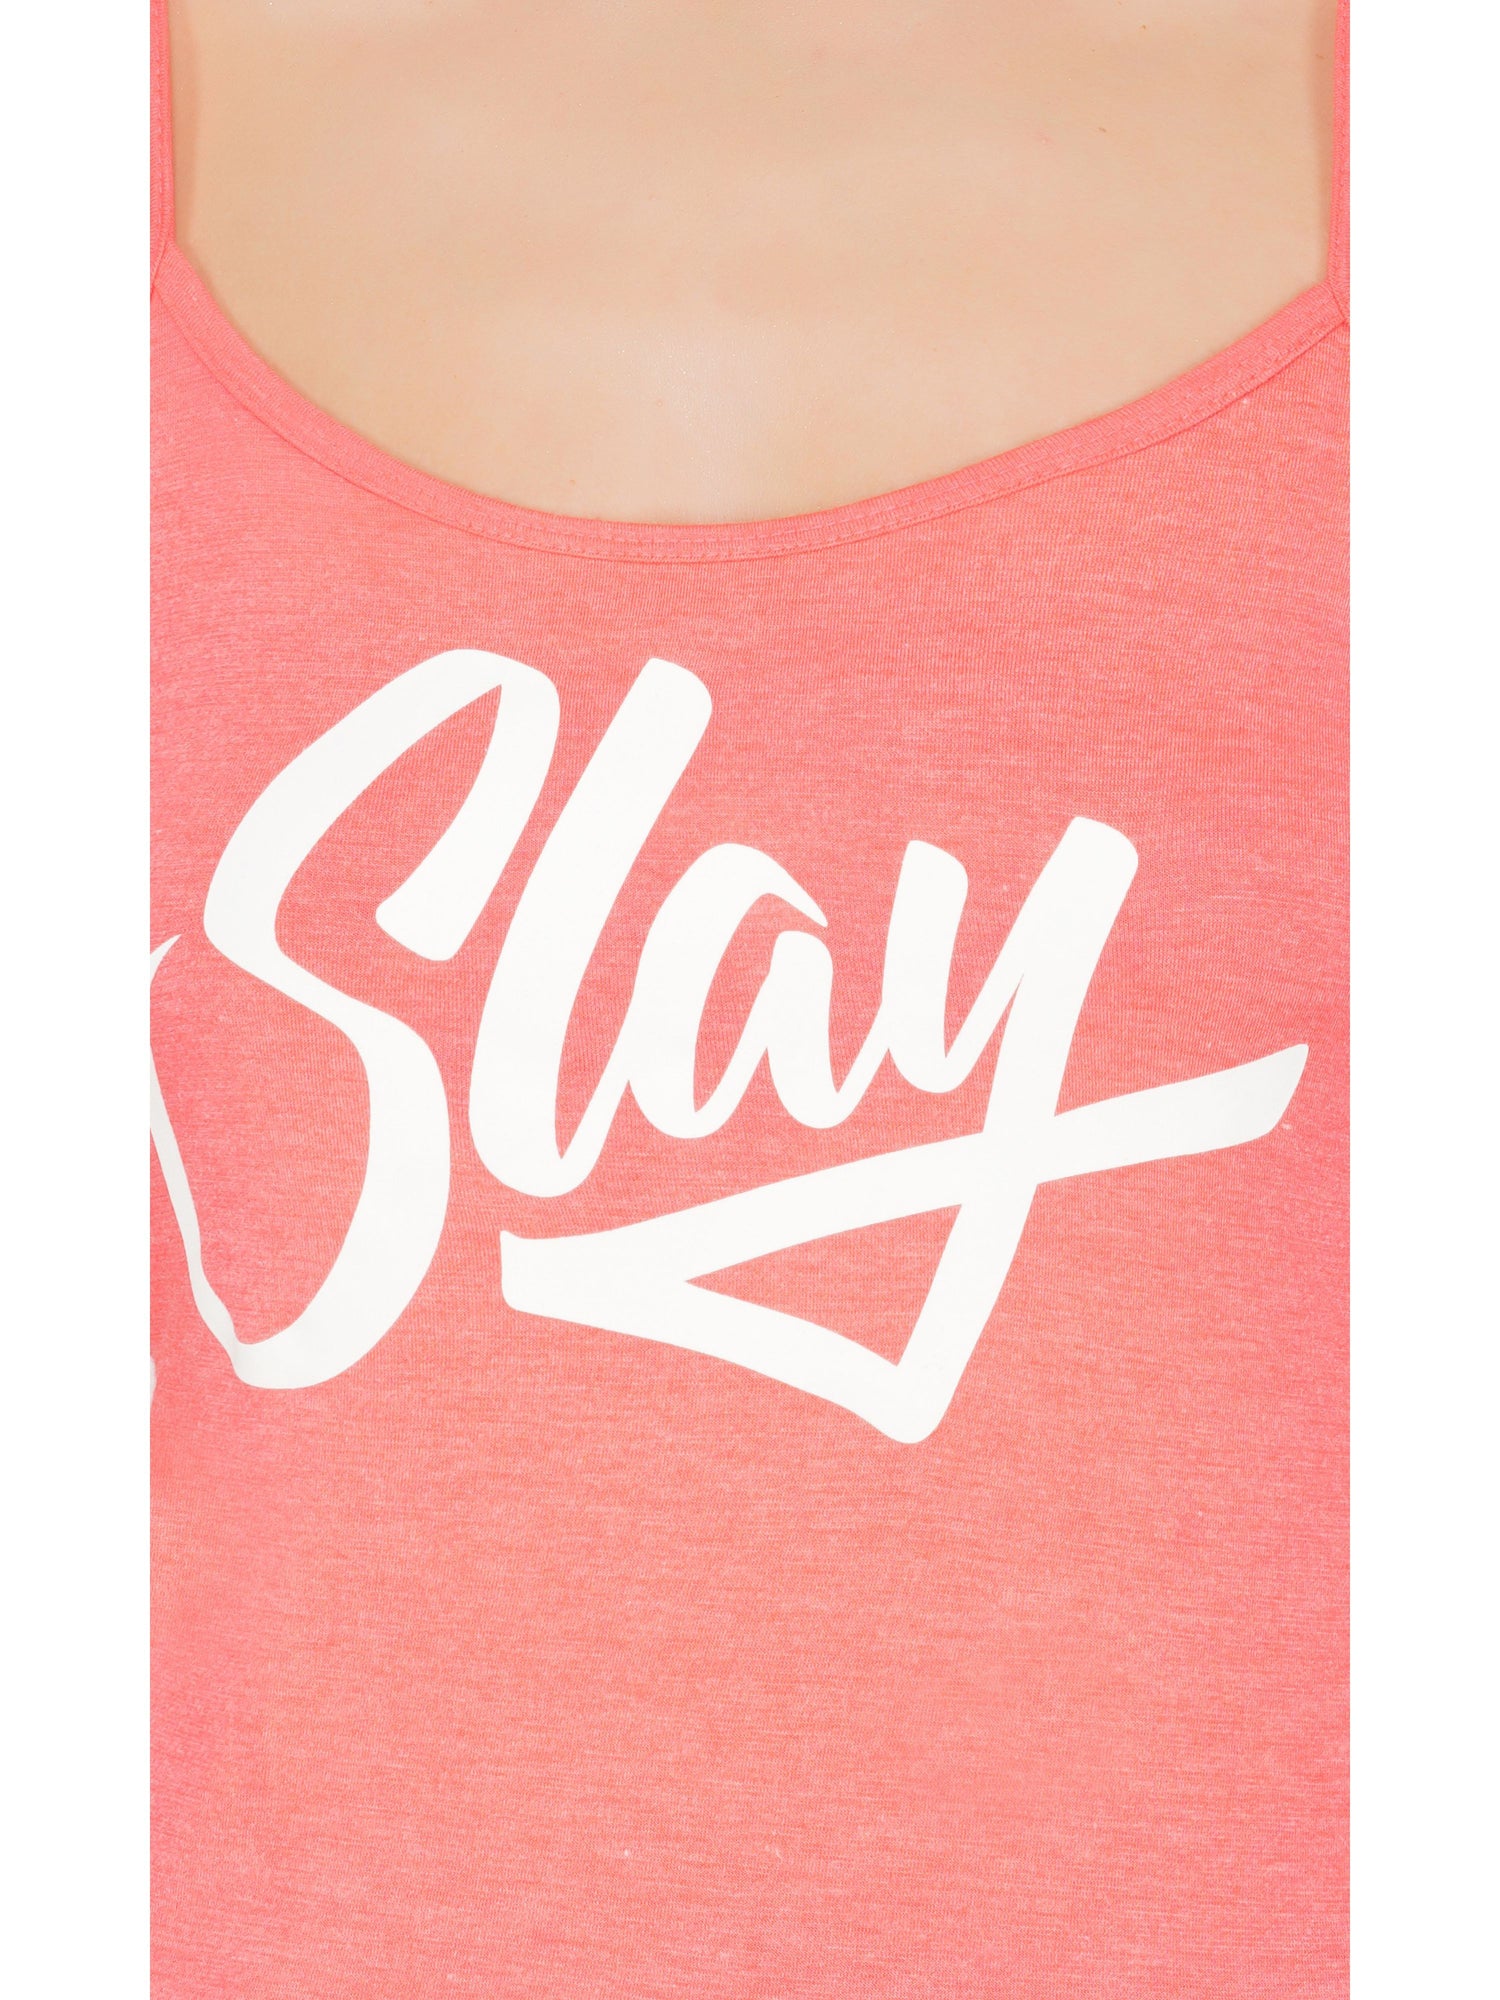 SLAY. Women's Neon Pink Printed Camisole-clothing-to-slay.myshopify.com-Camisole Top